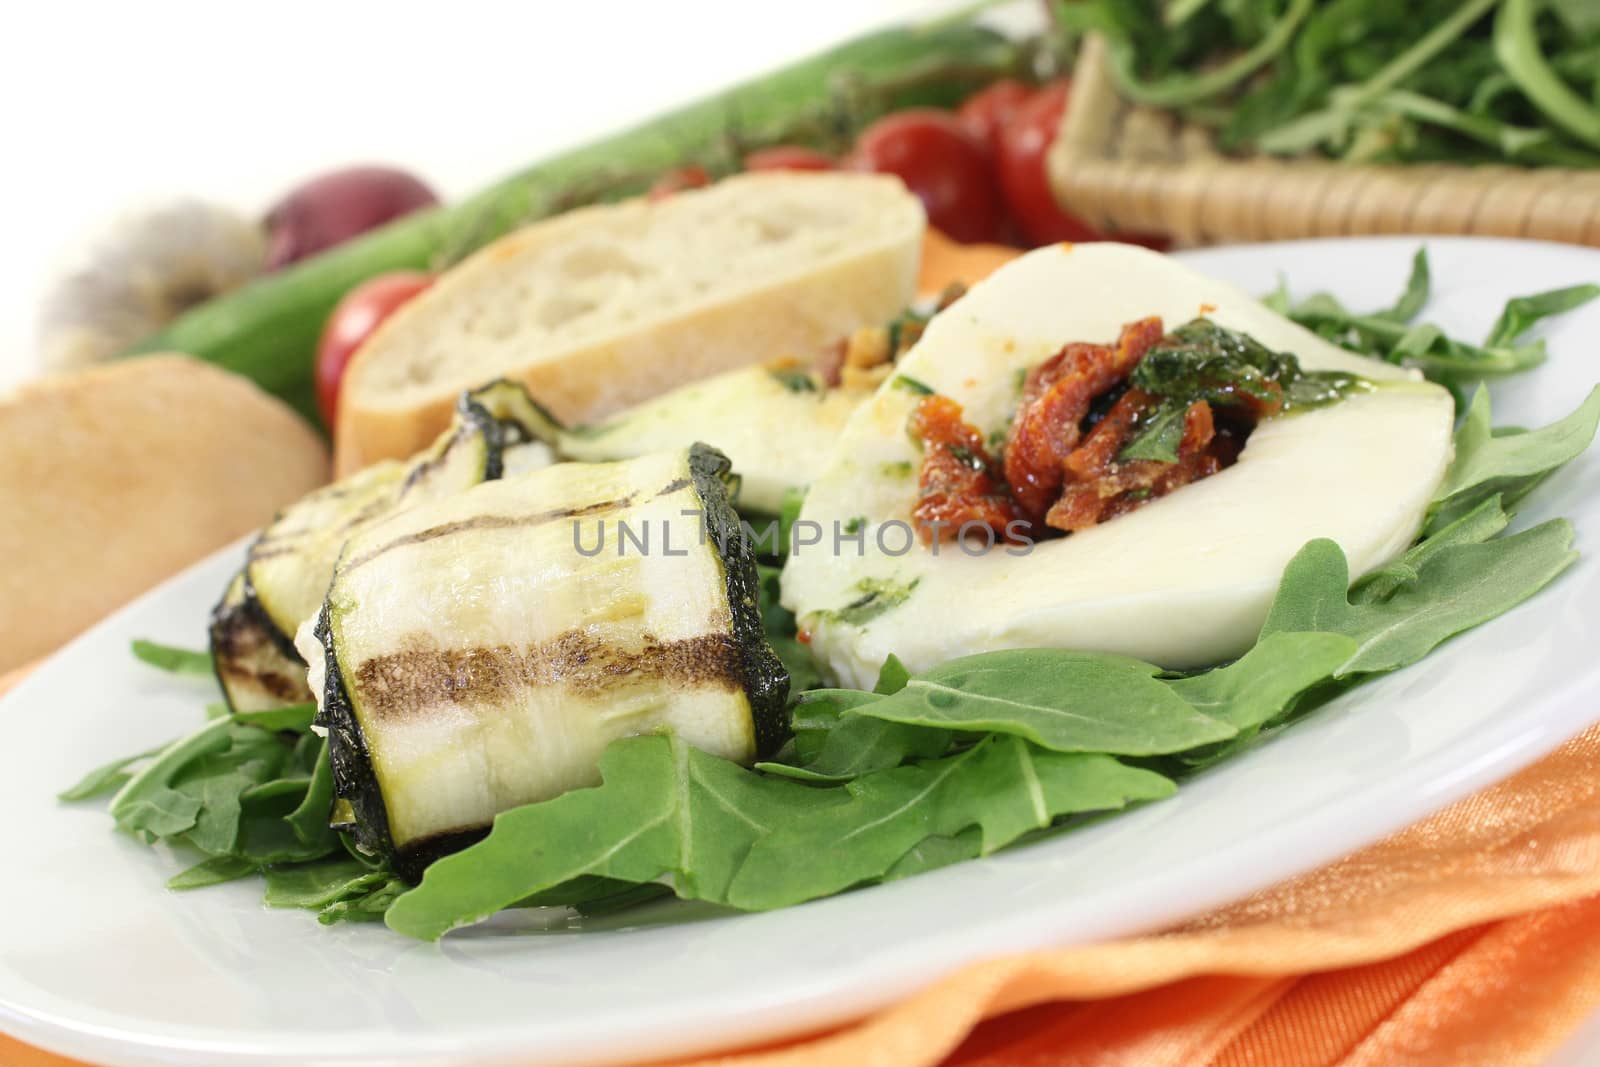 Courgette rolls and filled mozzarella and rocket salad on a bed